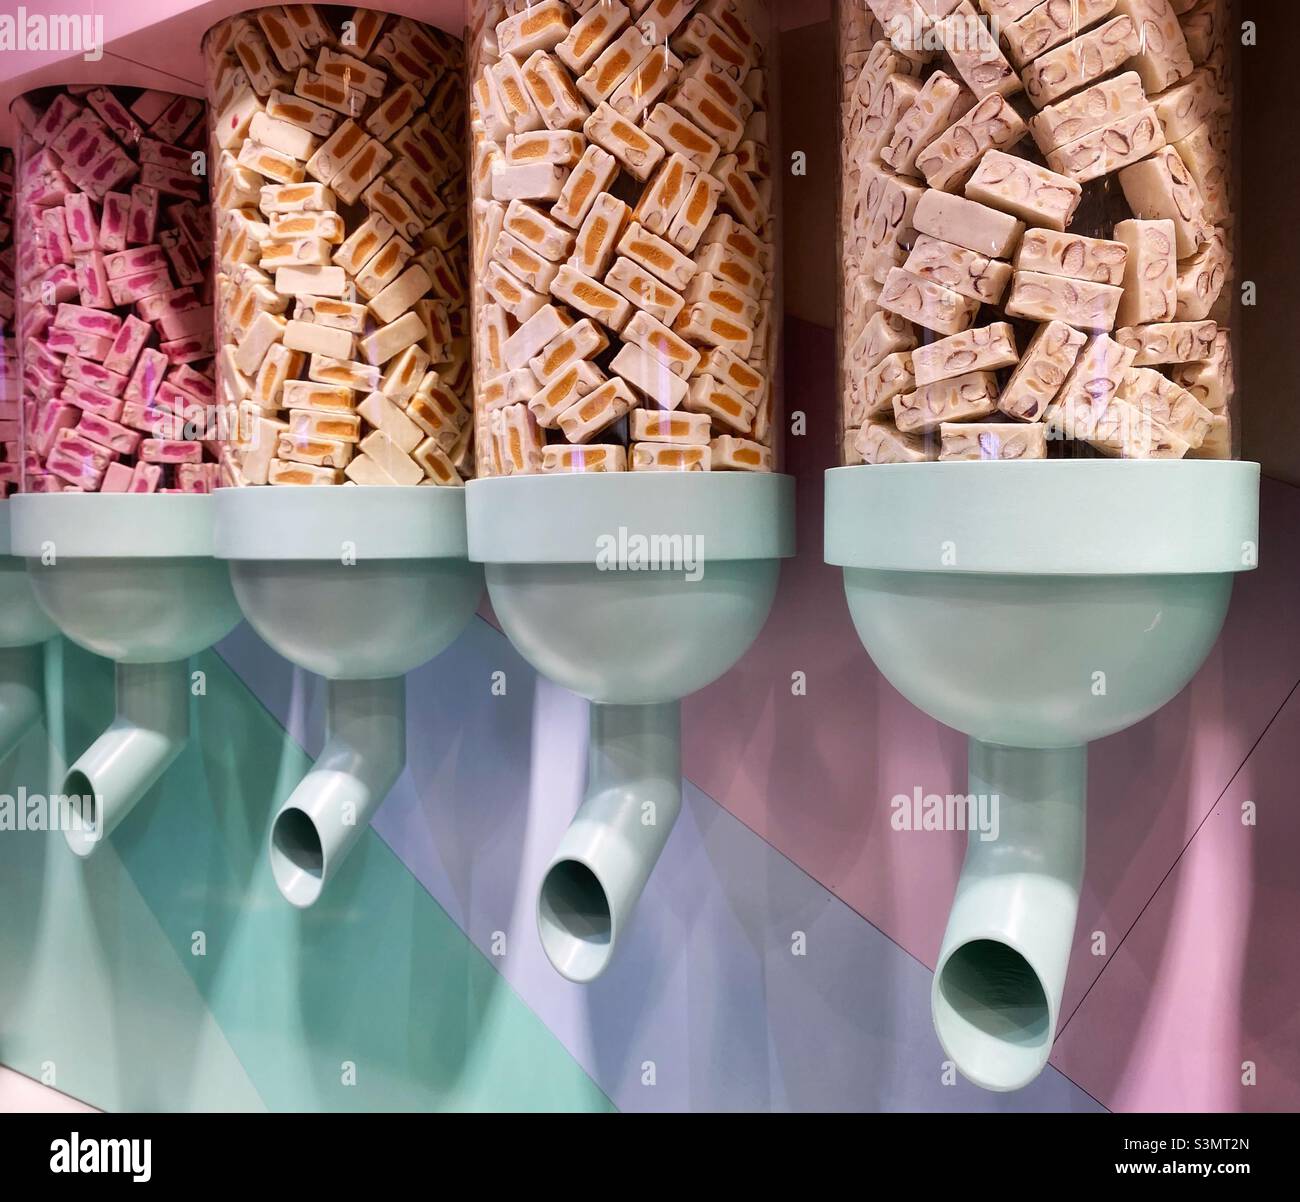 Display in a candy store Stock Photo